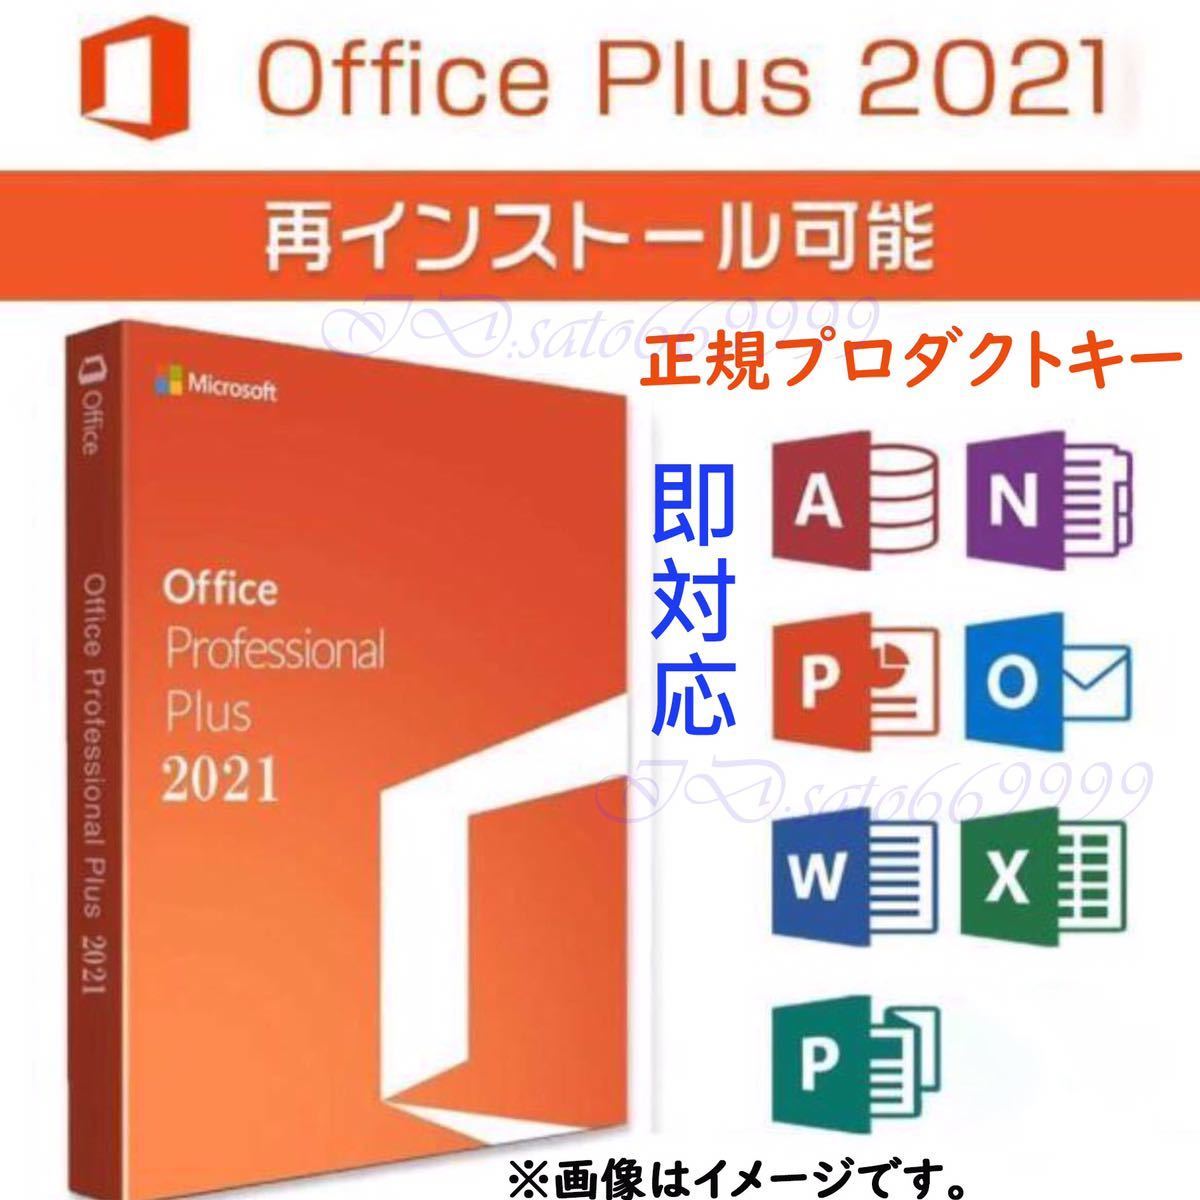 Microsoft Office 2021 Professional Plus 永年正規品プロダクトキー☆ Access Word Excel PowerPoint 認証保証 日本語 手順書付き 火_画像1